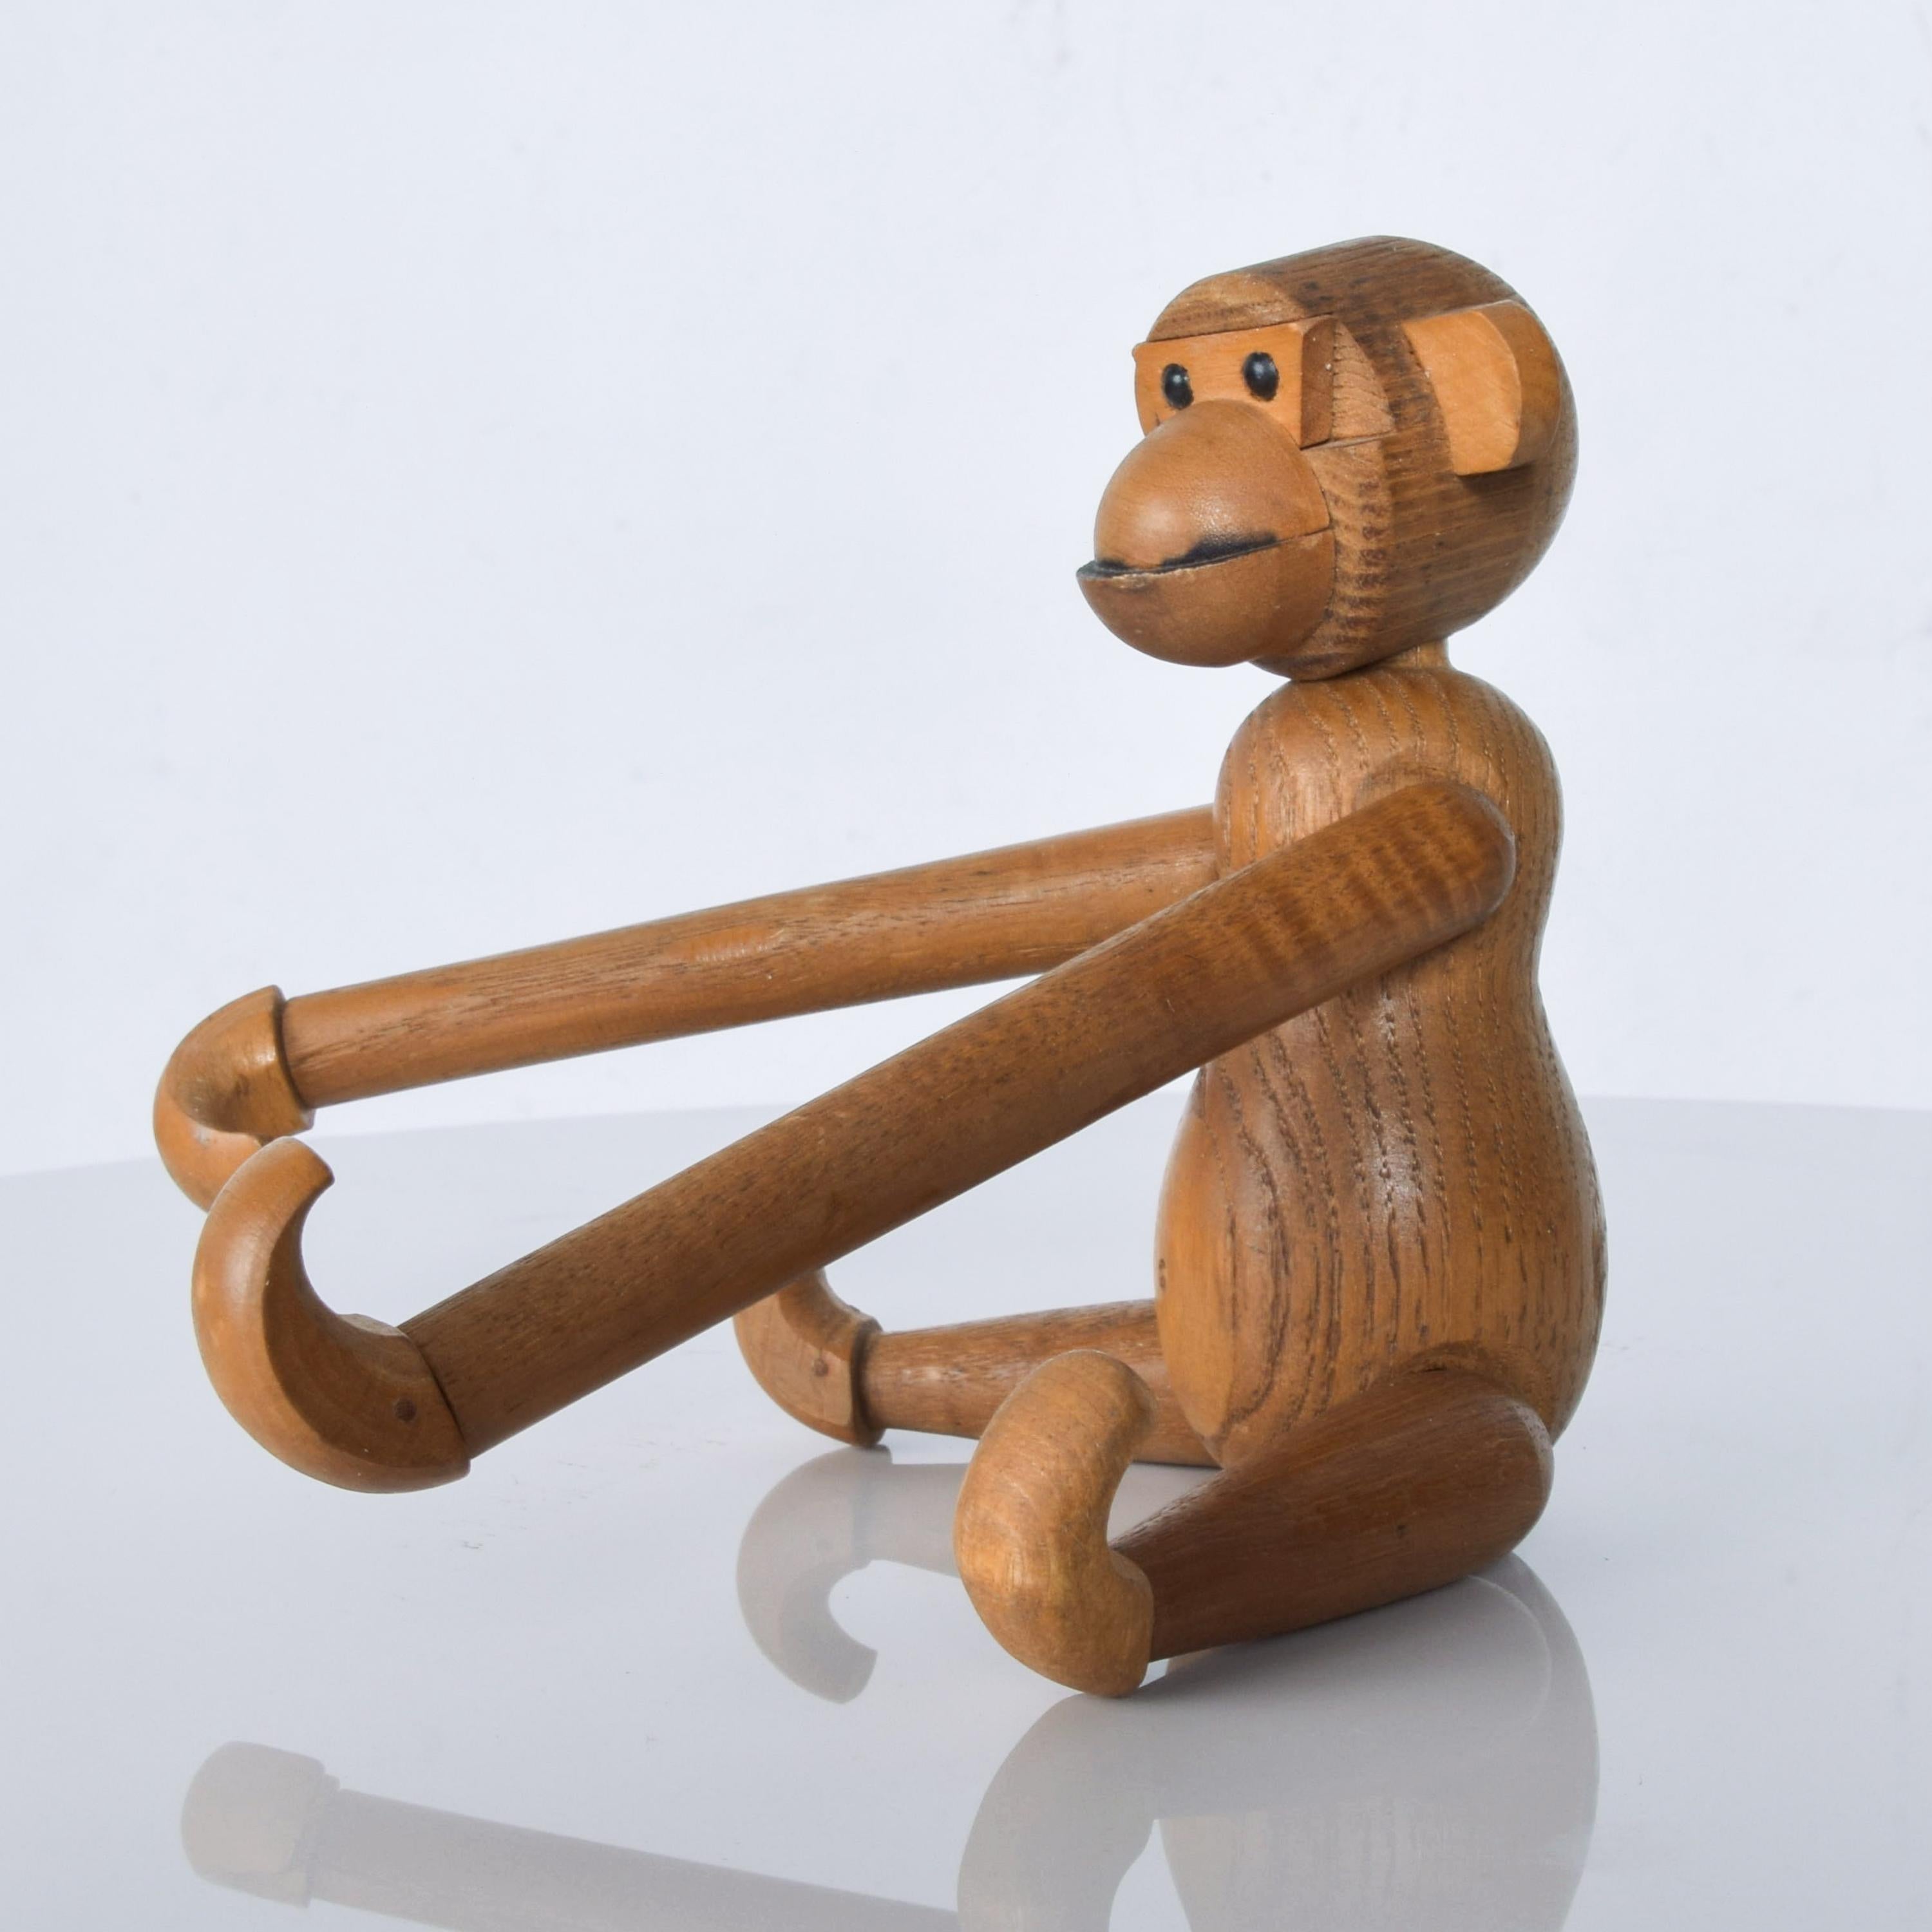 After Kay Bojesen of Denmark Danish style teak and oak jointed flexible toy Monkey 1960s vintage Mid-Century Modern stamped made in Japan
Dimensions: 8